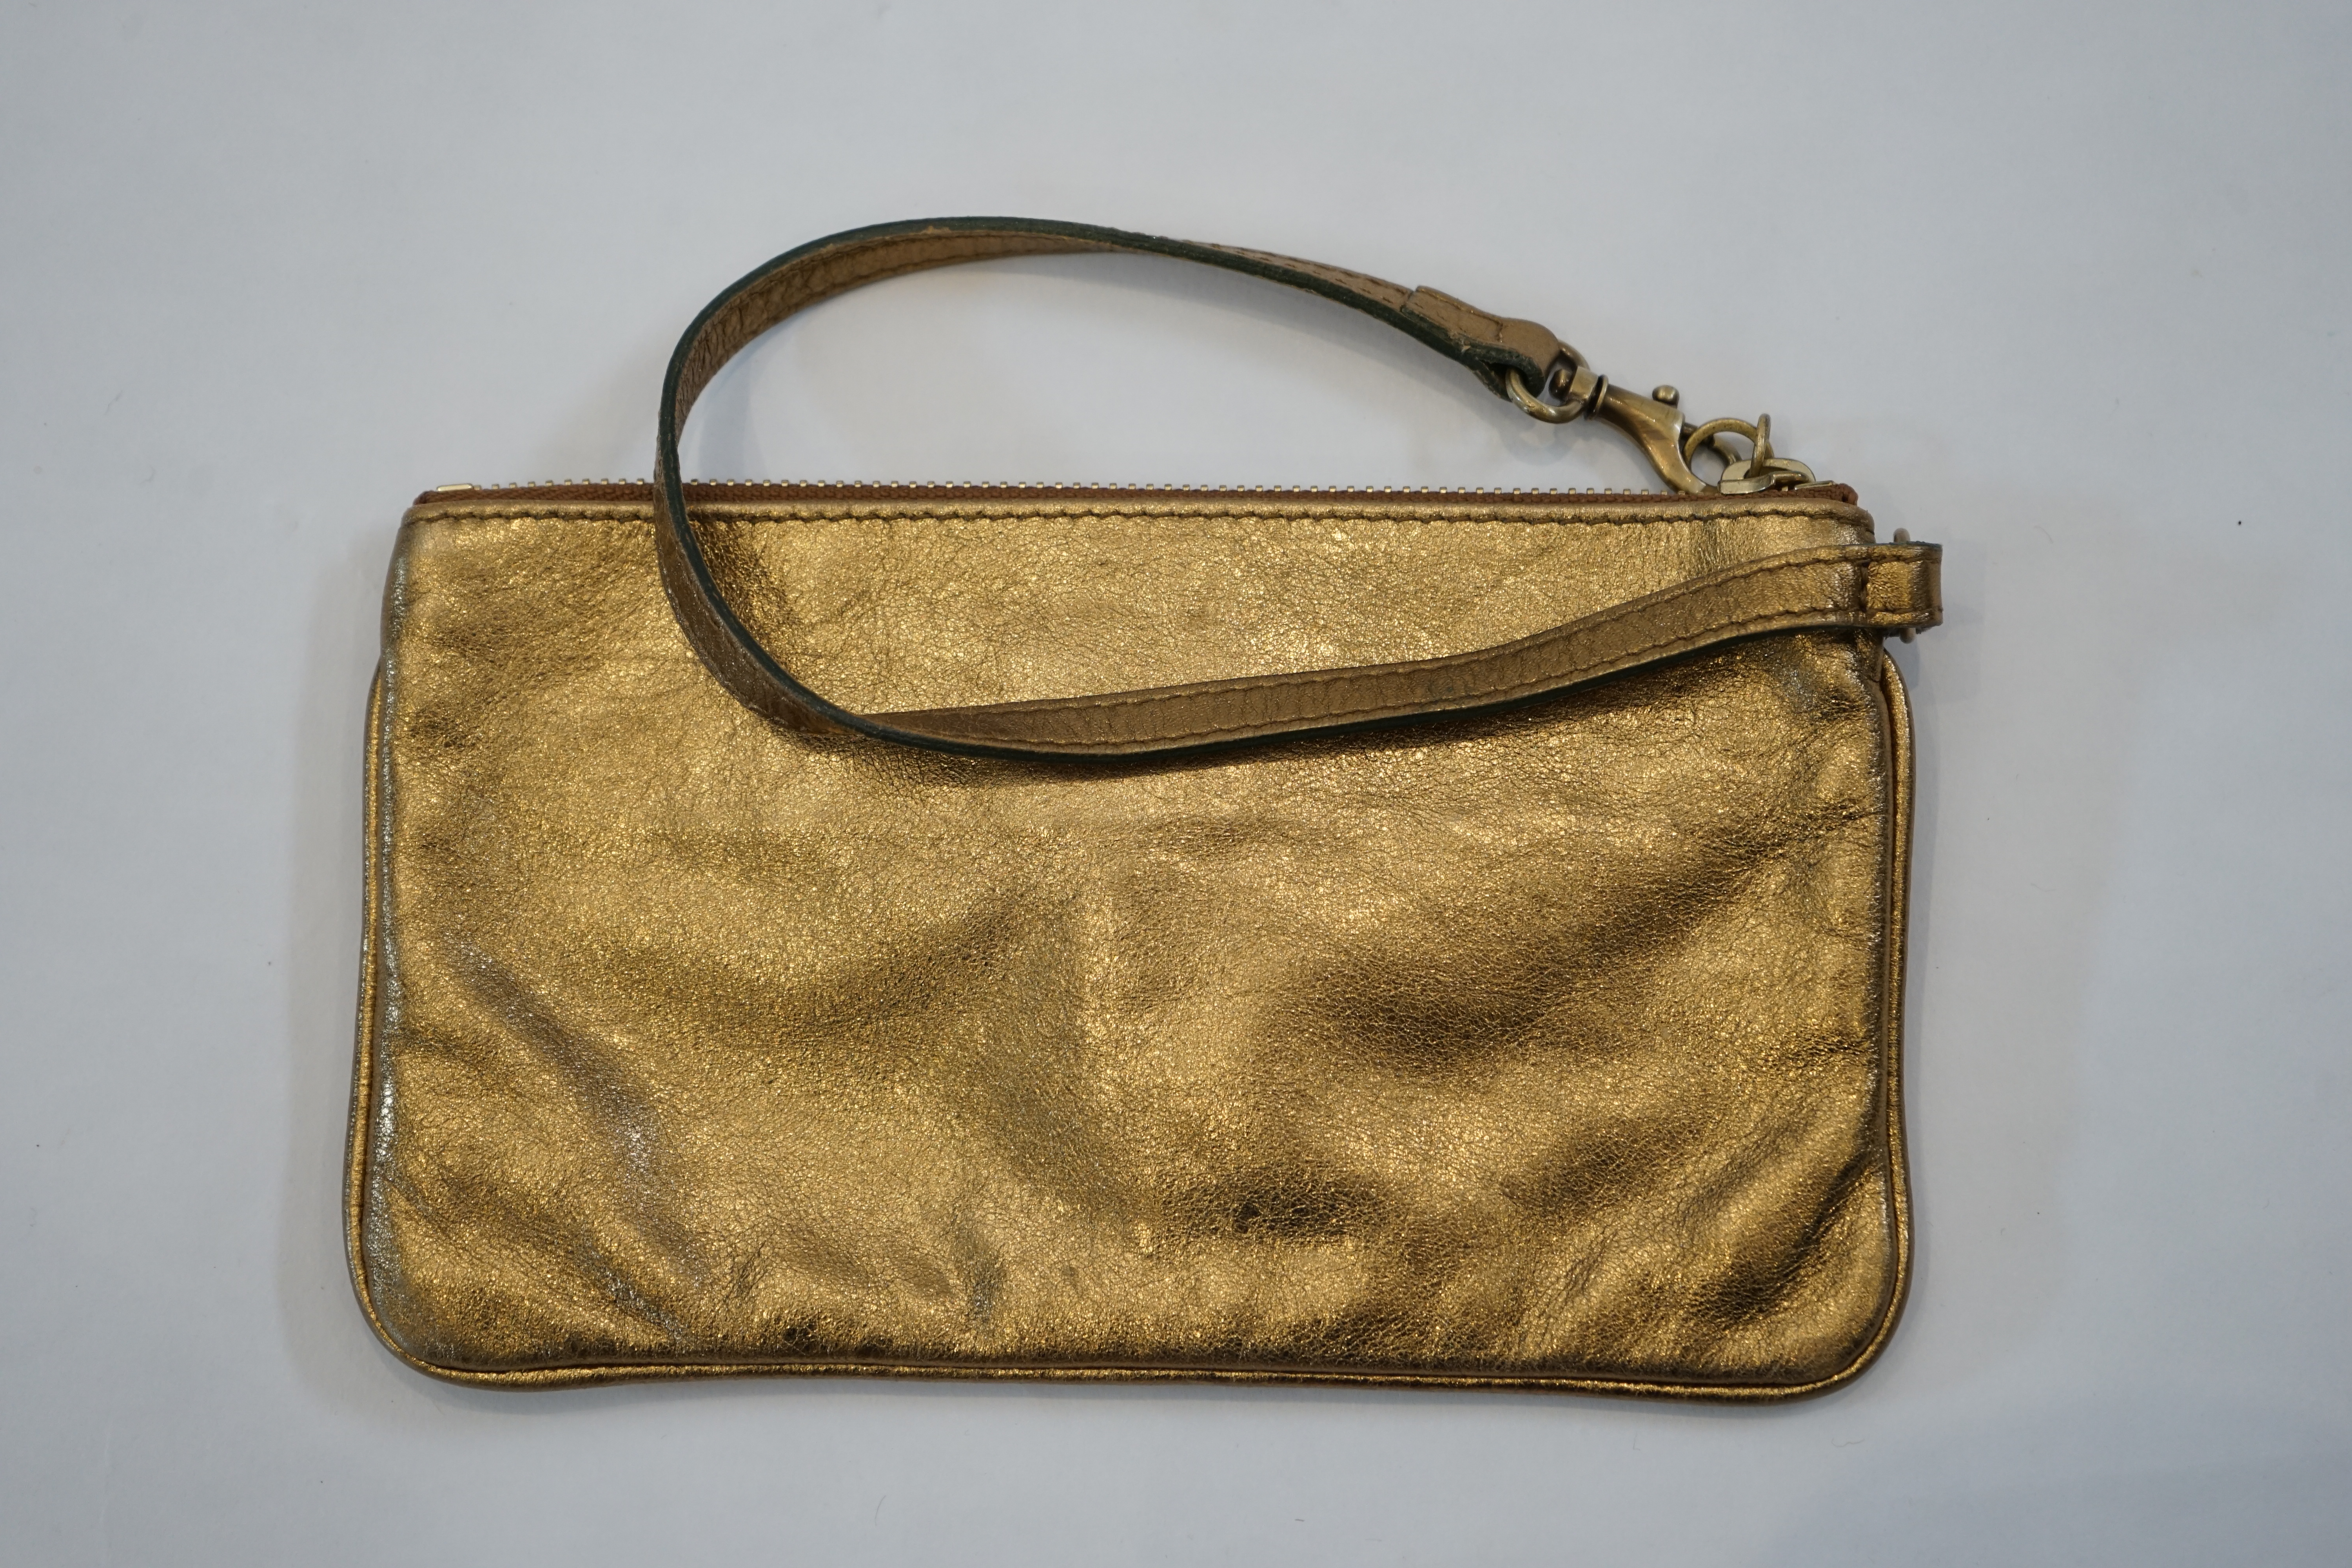 A Burberry gold leather clutch bag with original dust bag, approx length 19.5cm, height 11cm